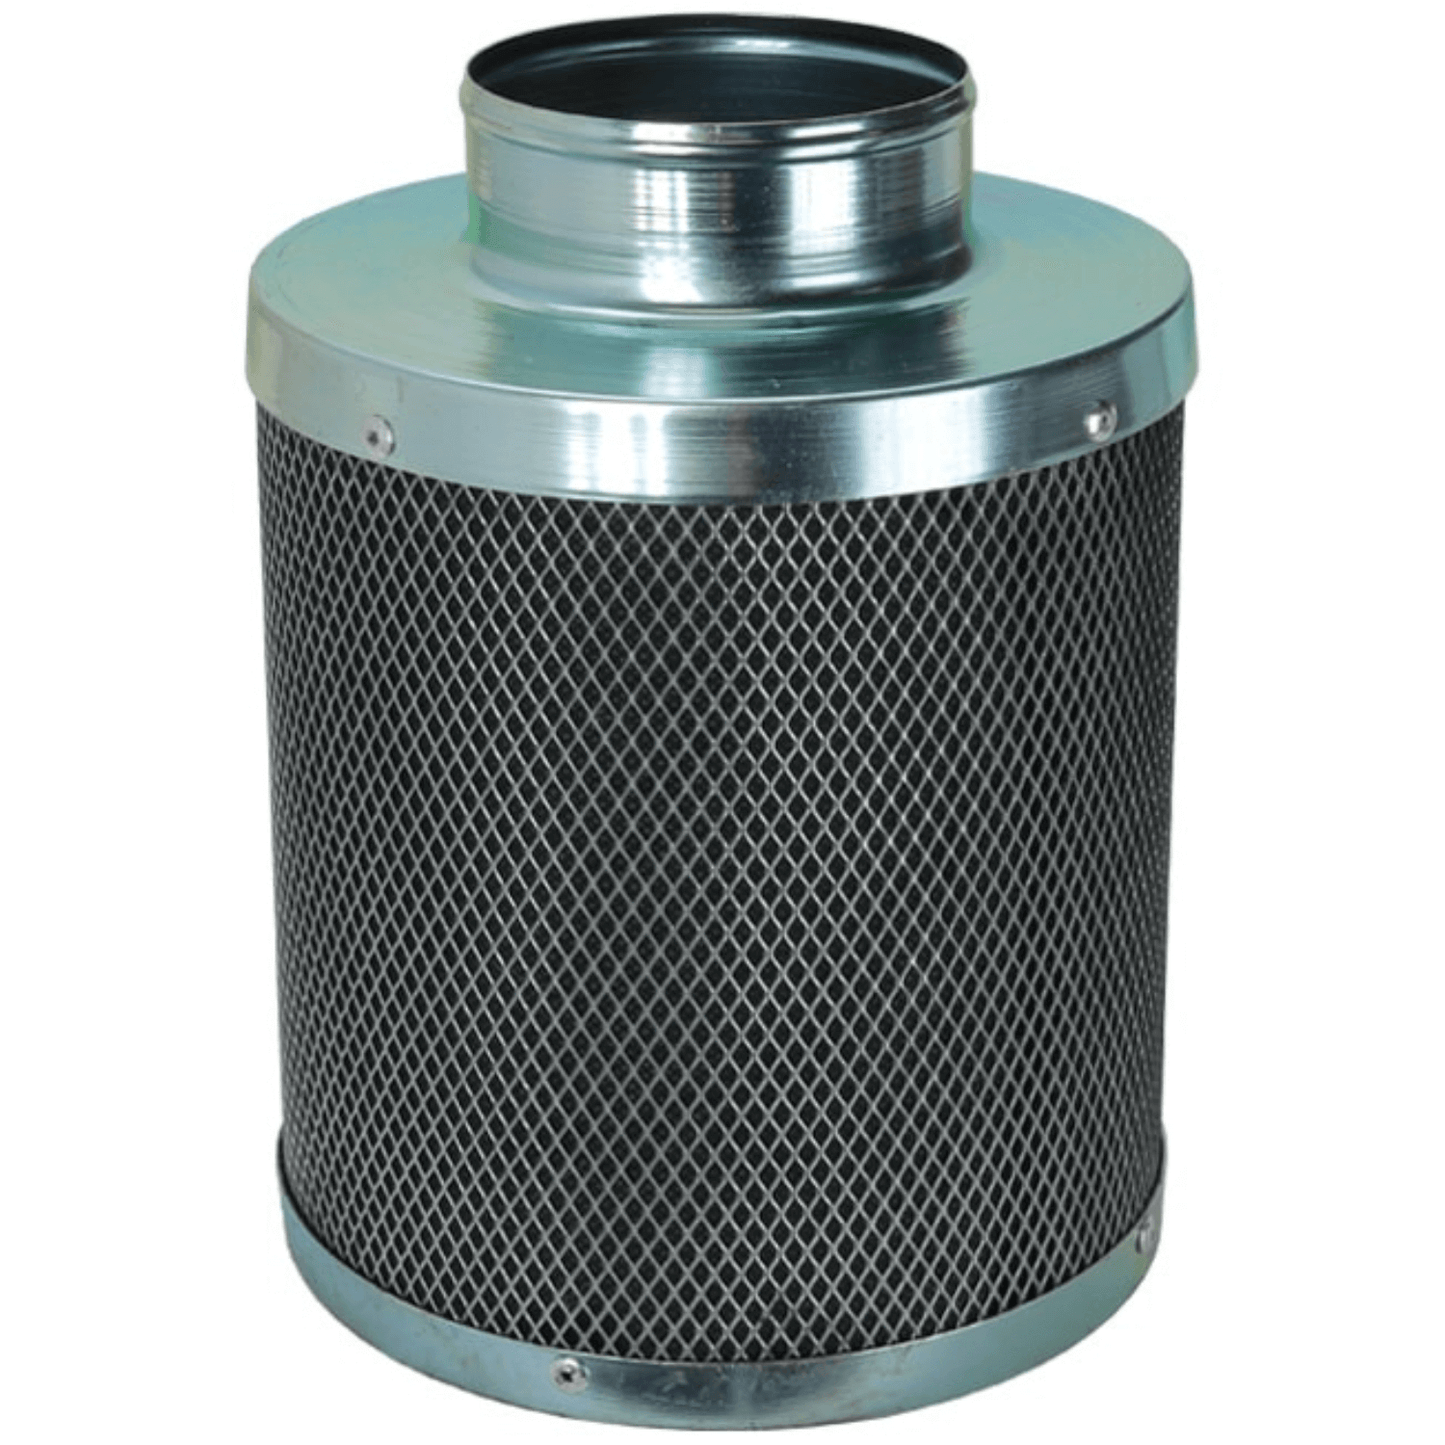 Charco Filters Plus 8" x 20" Activated Carbon Air Filter 971208 Climate Control 816731010054